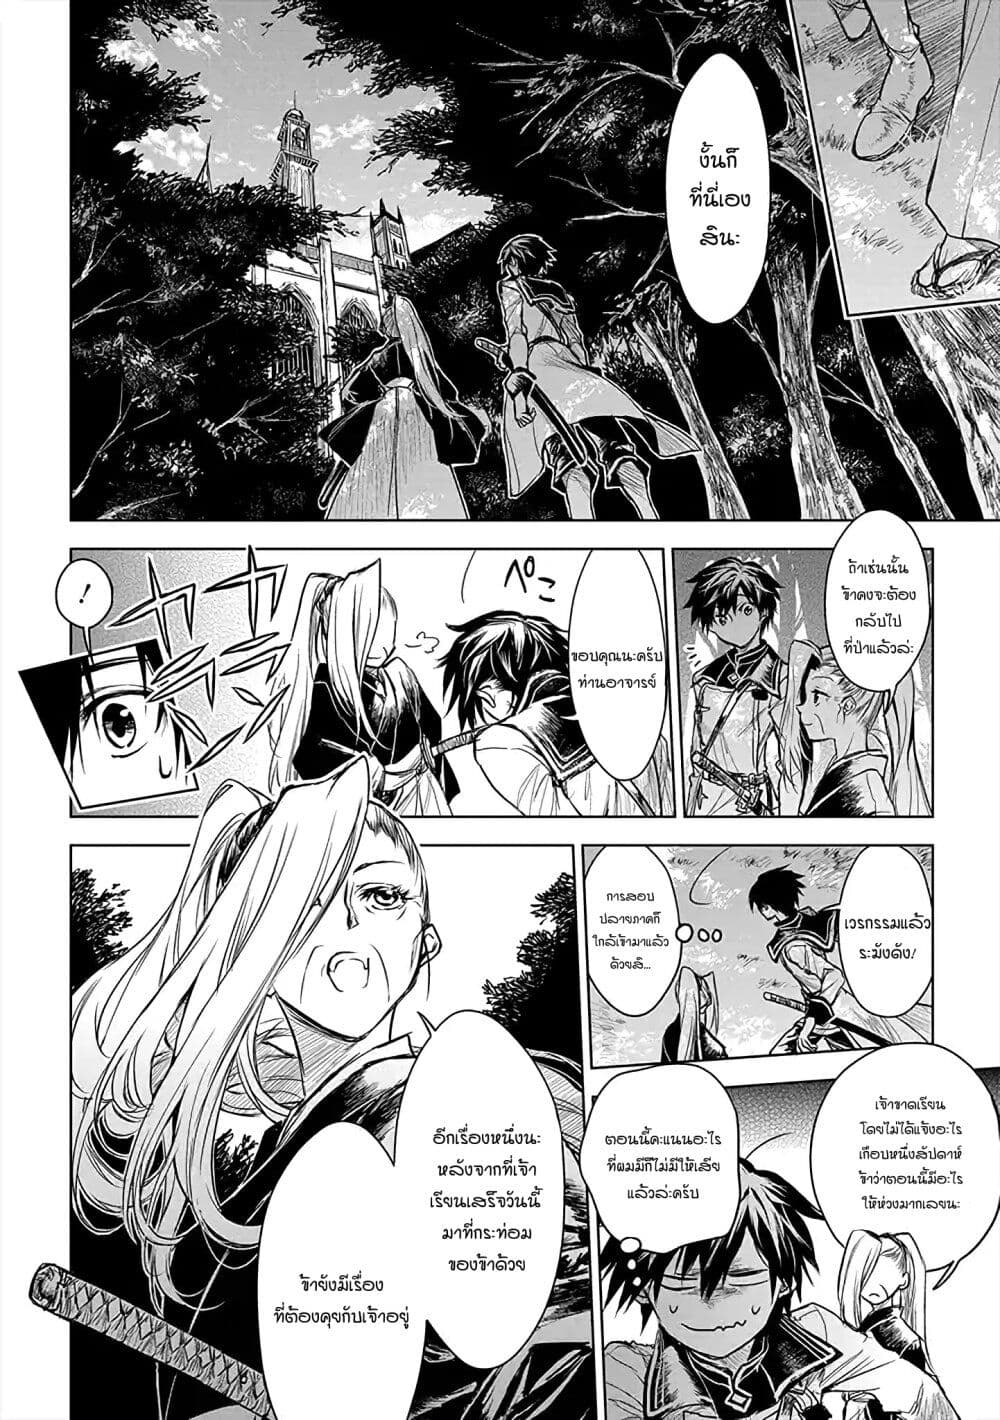 Ori of the Dragon Chain Heart in the Mind 10 (6)